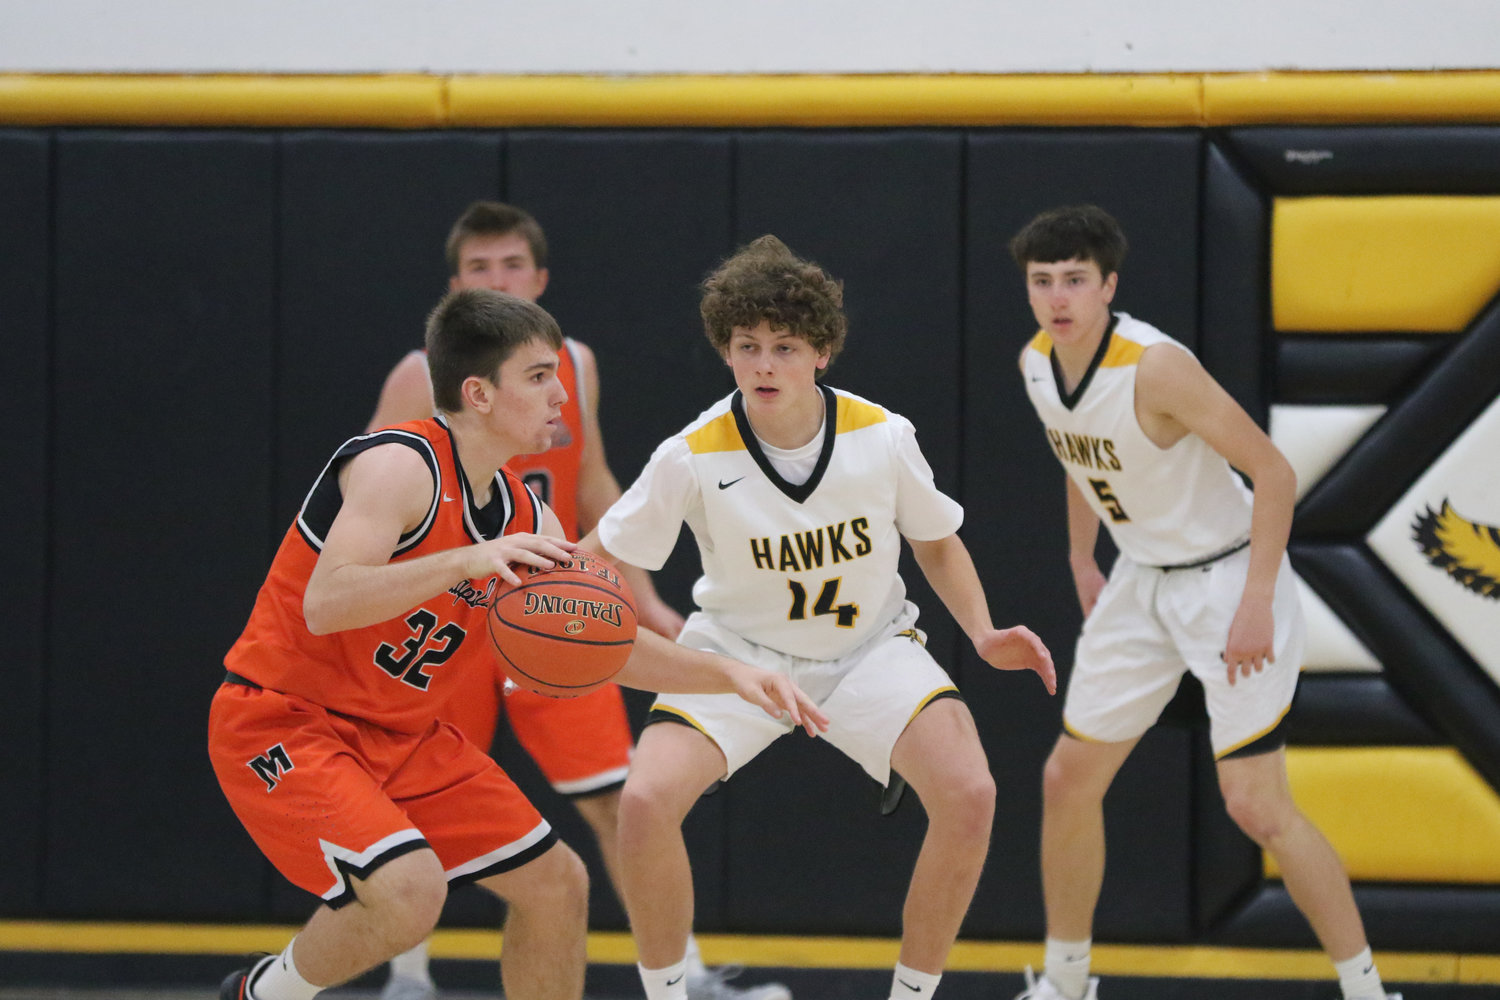 Mid-Prairie guard Jackson Pennington (14) defends Mediapolis' Ben Egan during the first quarter of a scrimmage in Wellman on Saturday, November 21.